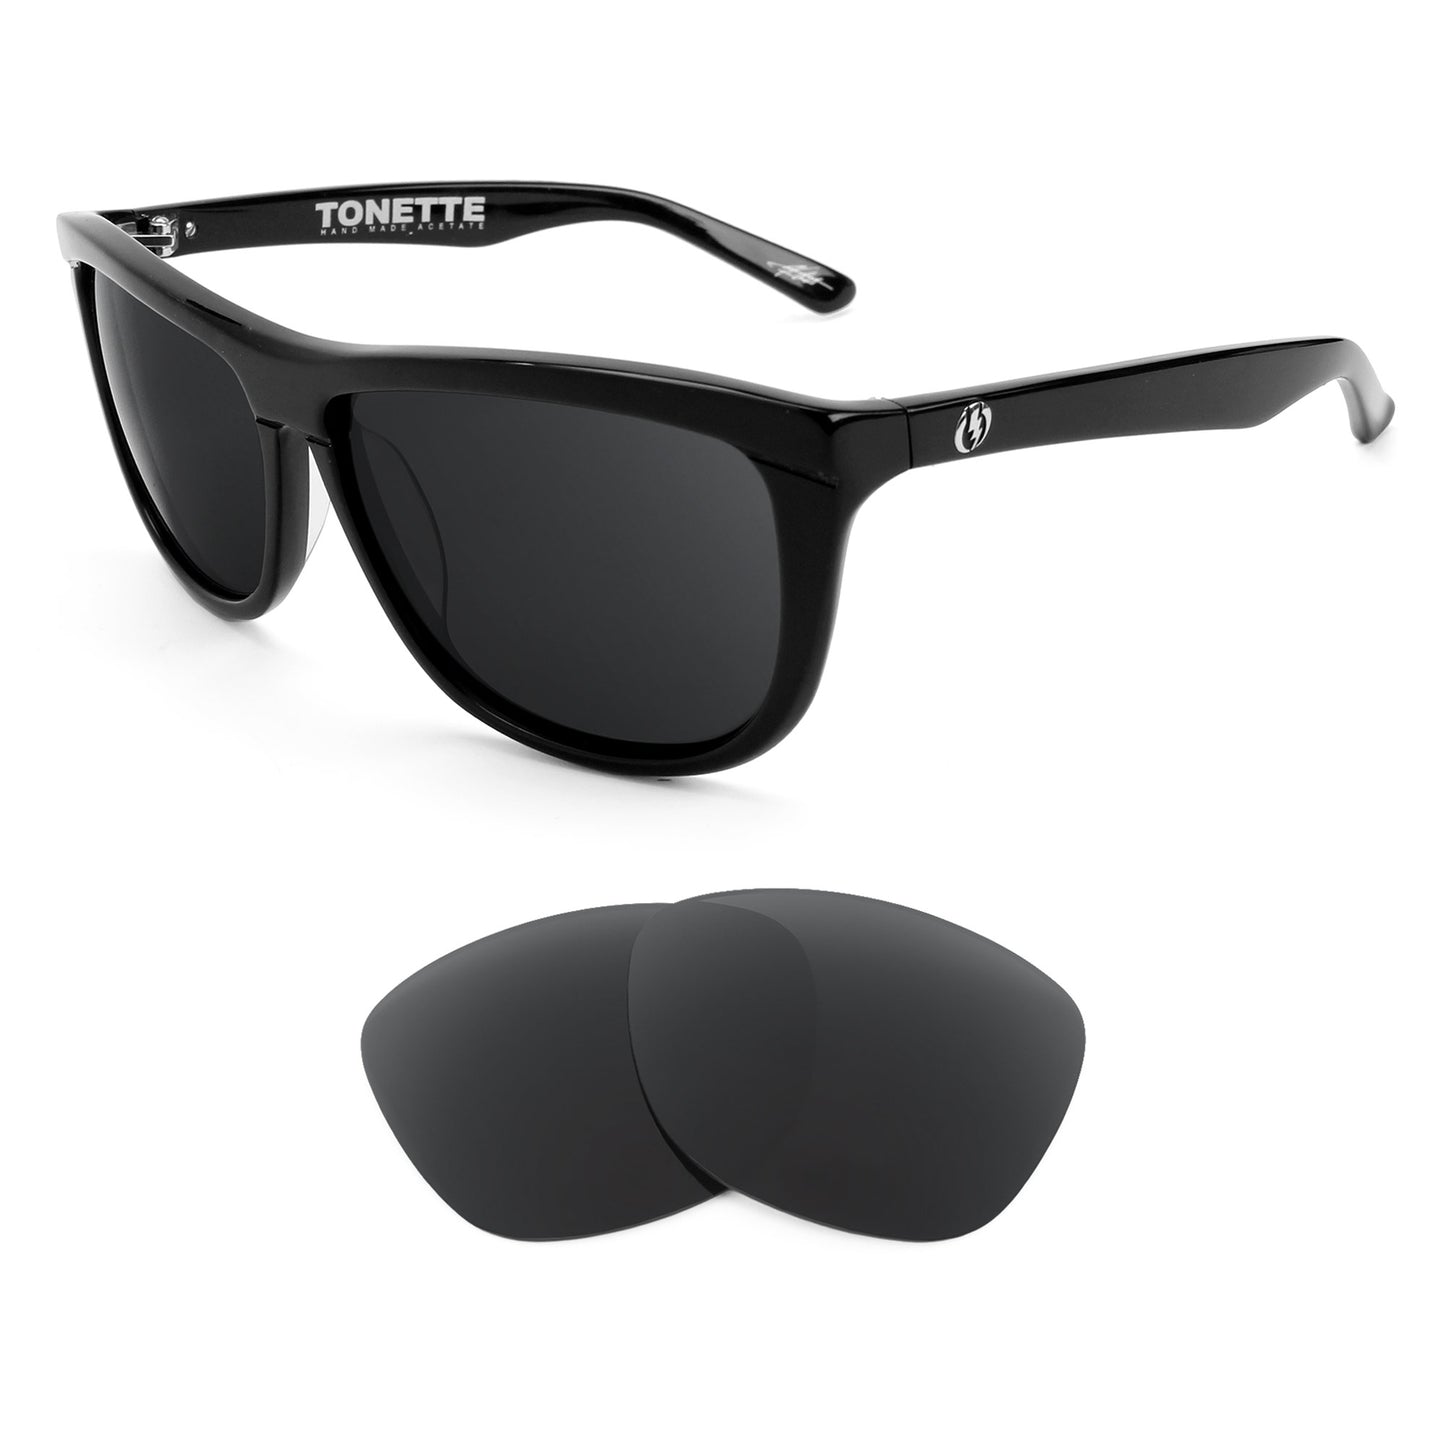 Electric Tonette sunglasses with replacement lenses